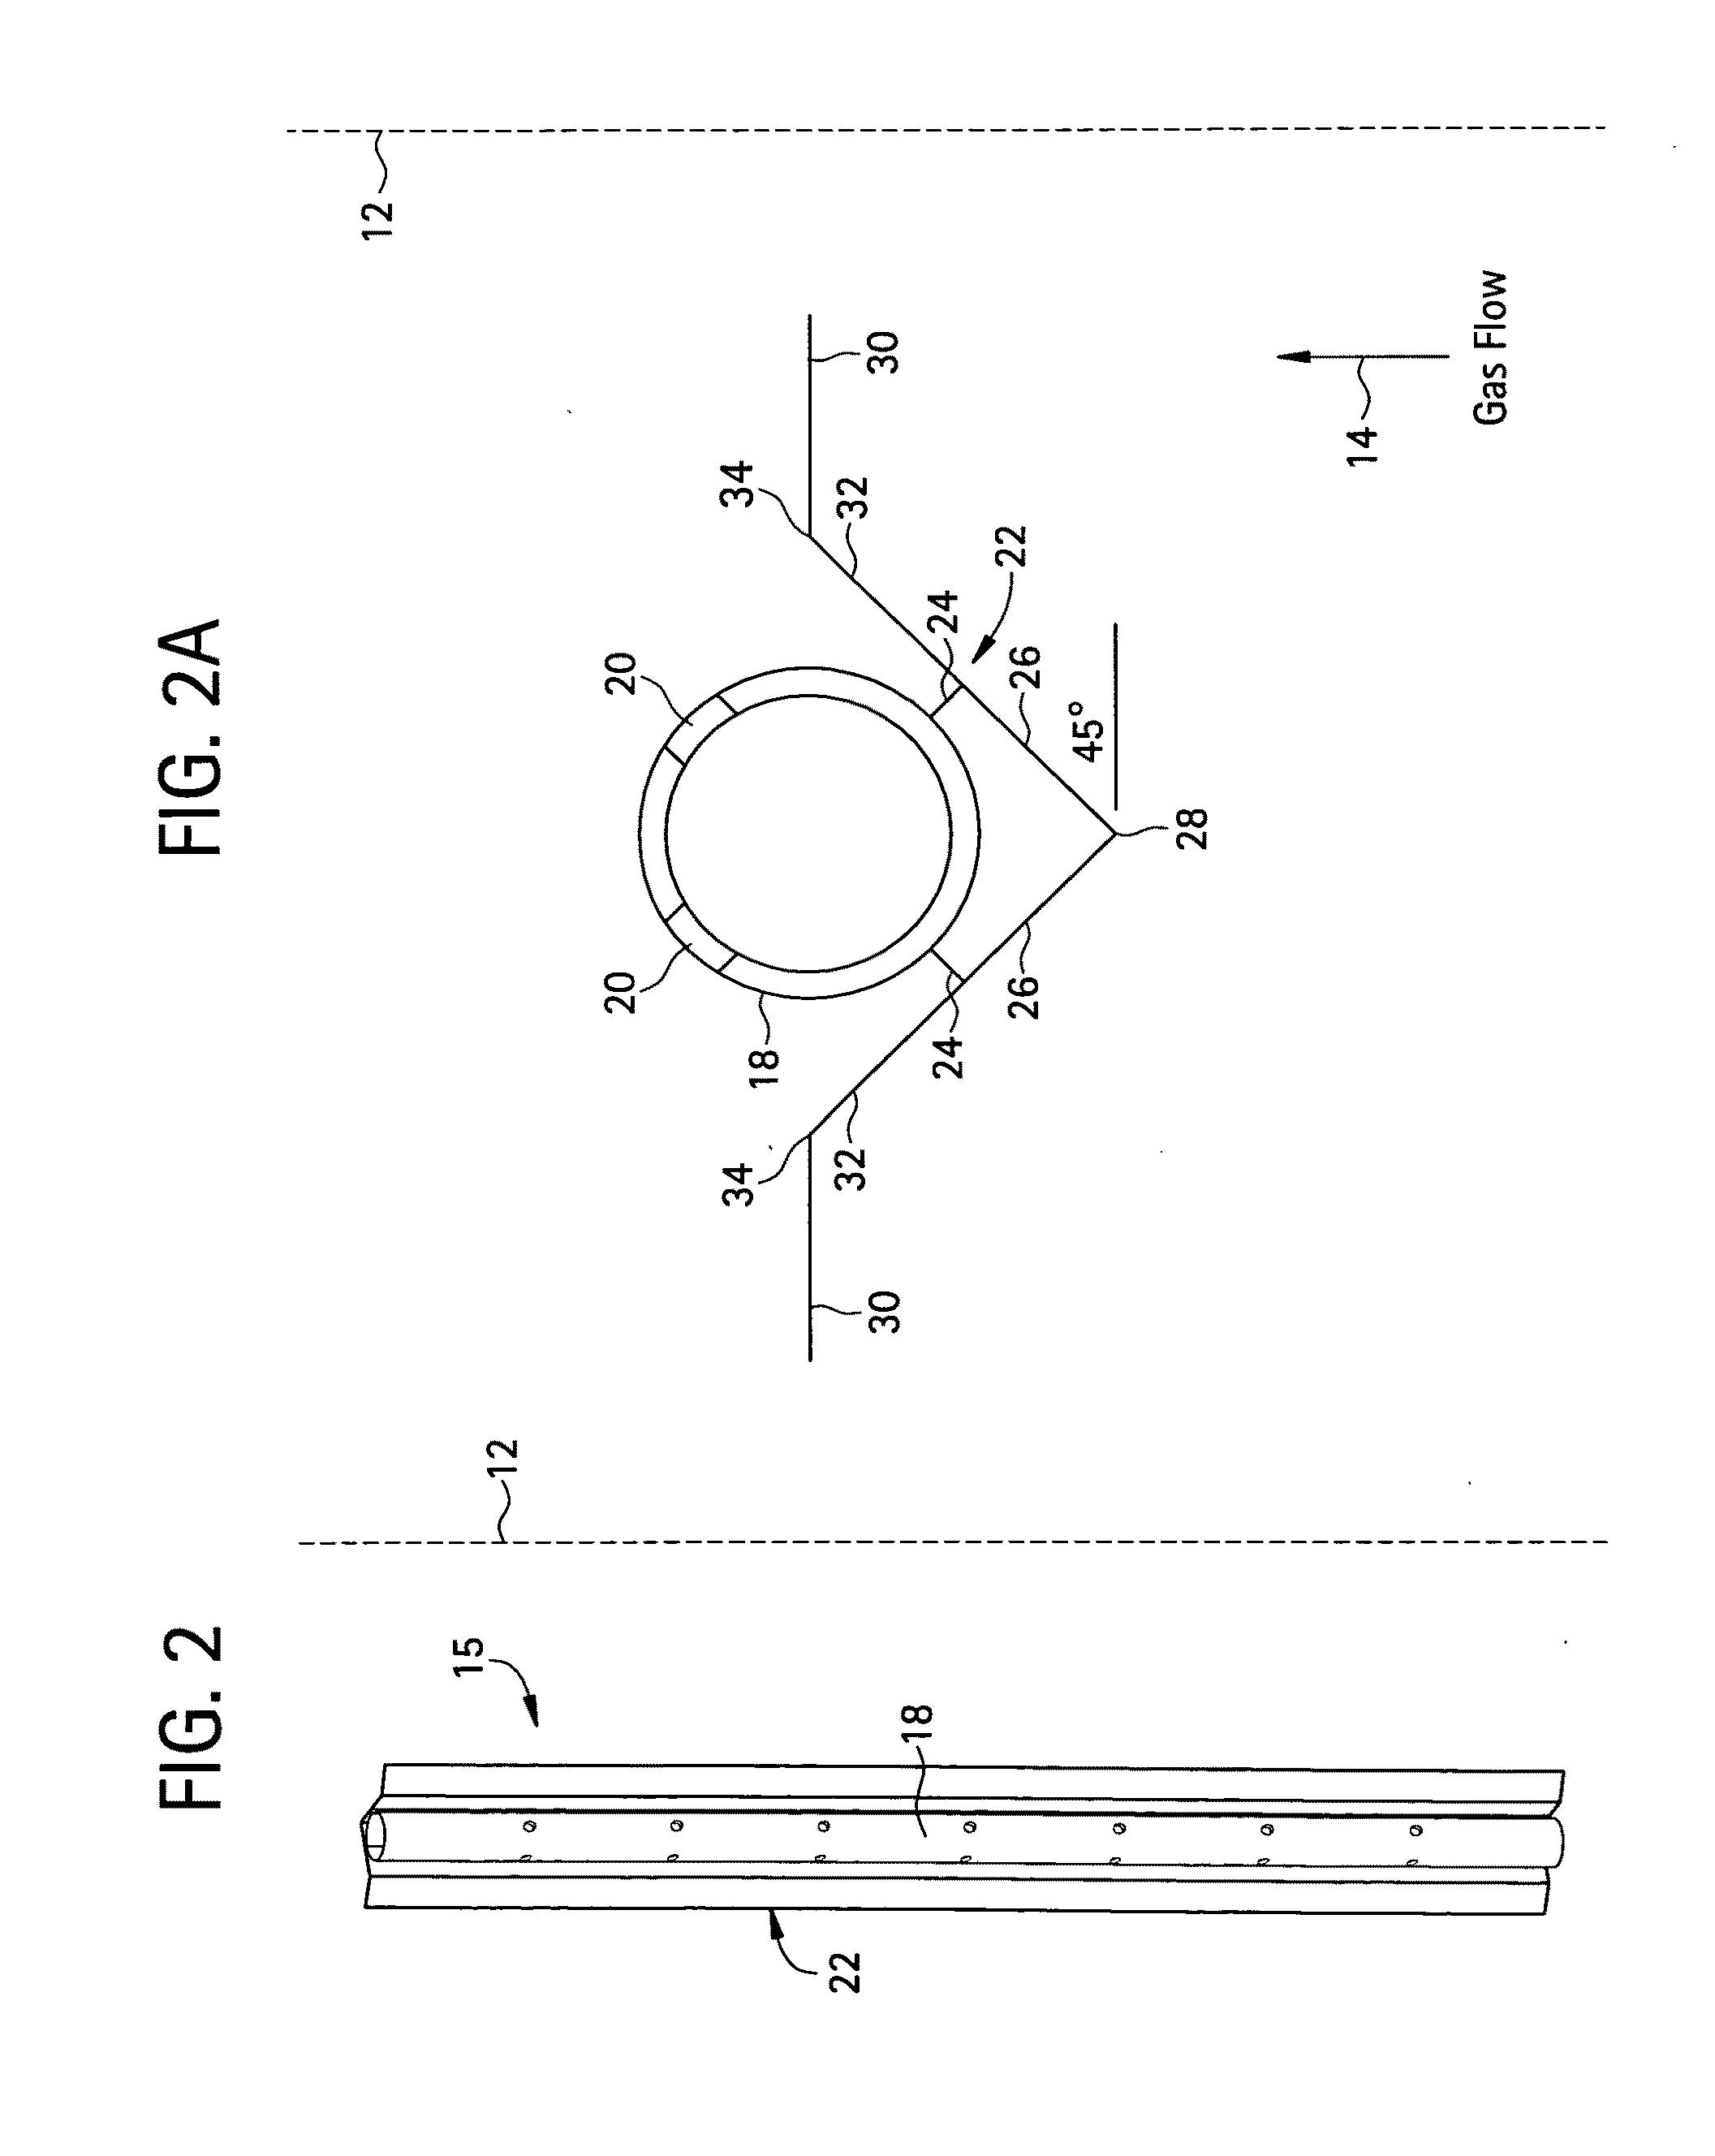 Dispersion lance and shield for dispersing a treating agent into a fluid stream